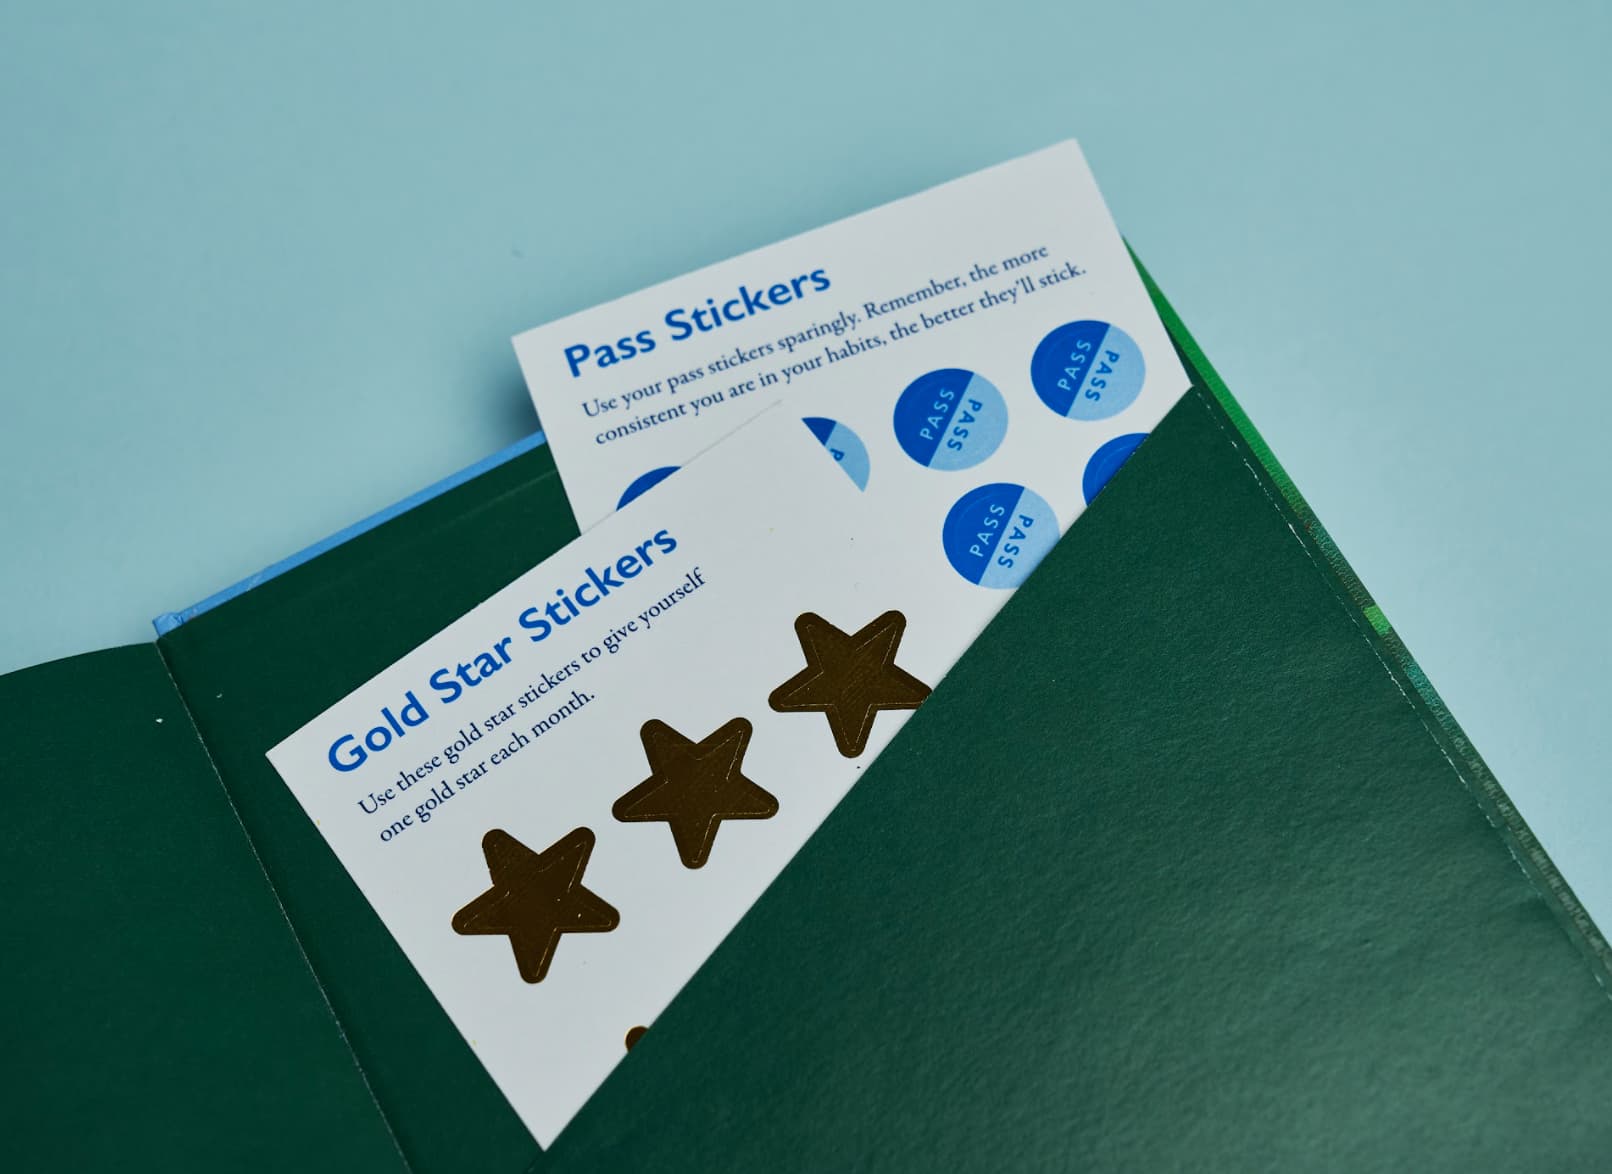 Gold star and pass stickers from the Don't Break the Chain Journal